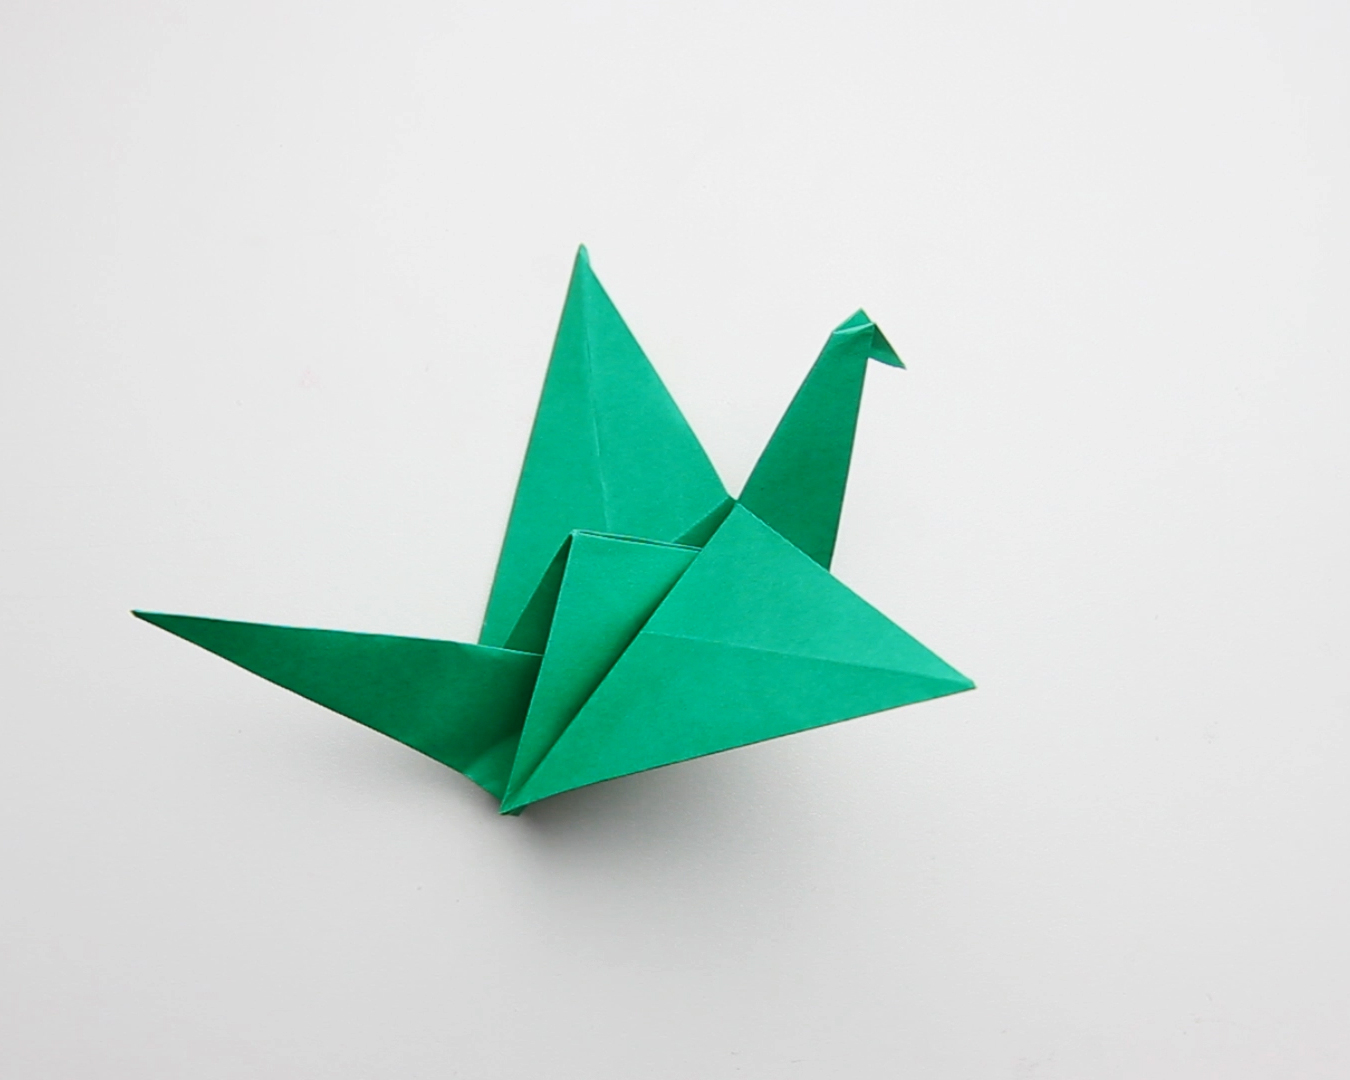 How To Make An Origami Flapping Bird Step By Step Origami Flapping Bird